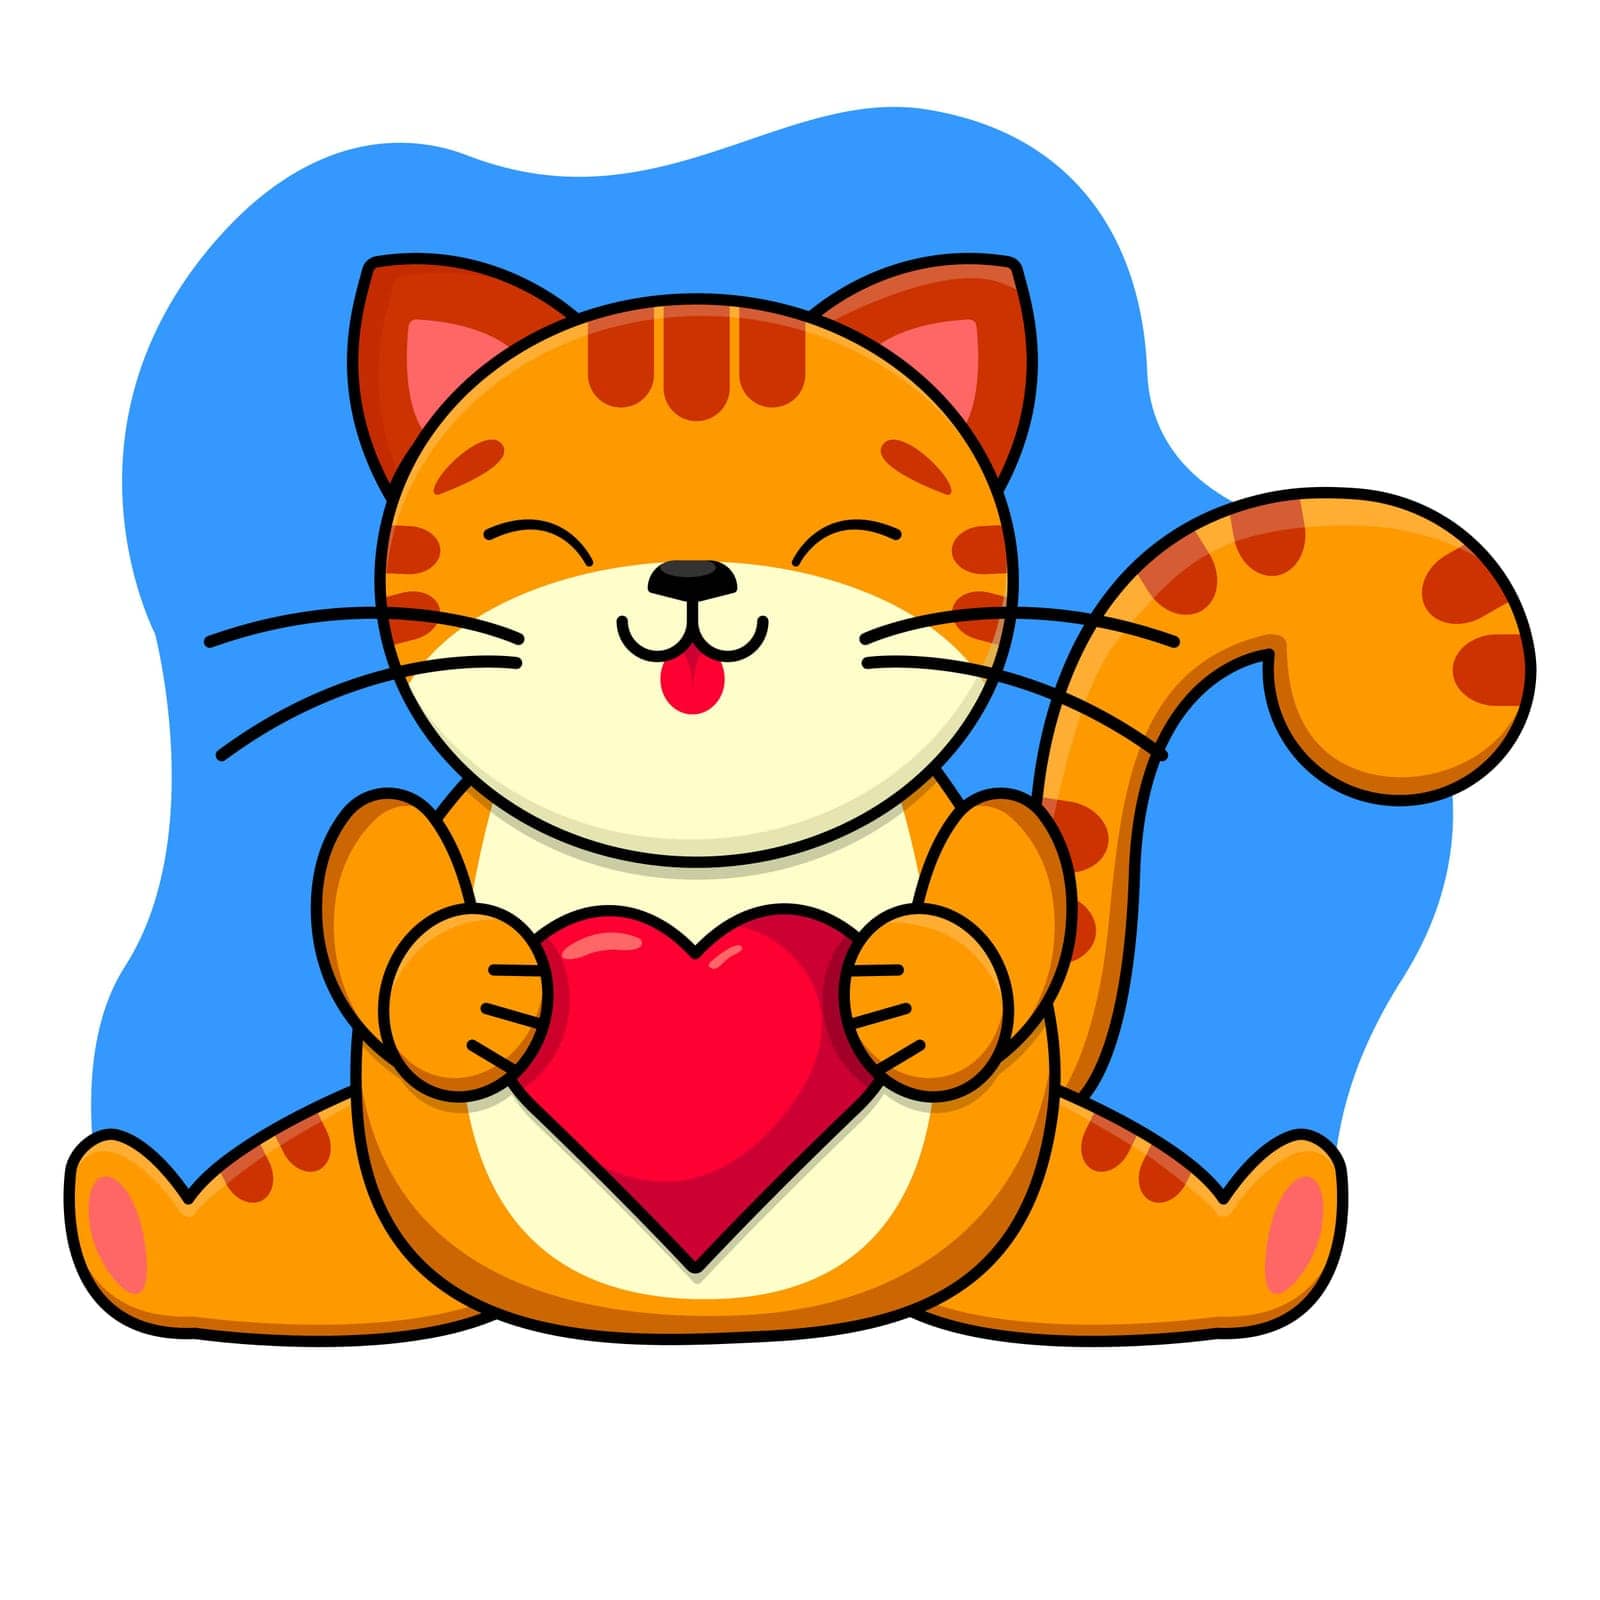 A ginger smiling cat holds a red heart in its paws. Childrens print. Vector illustration.